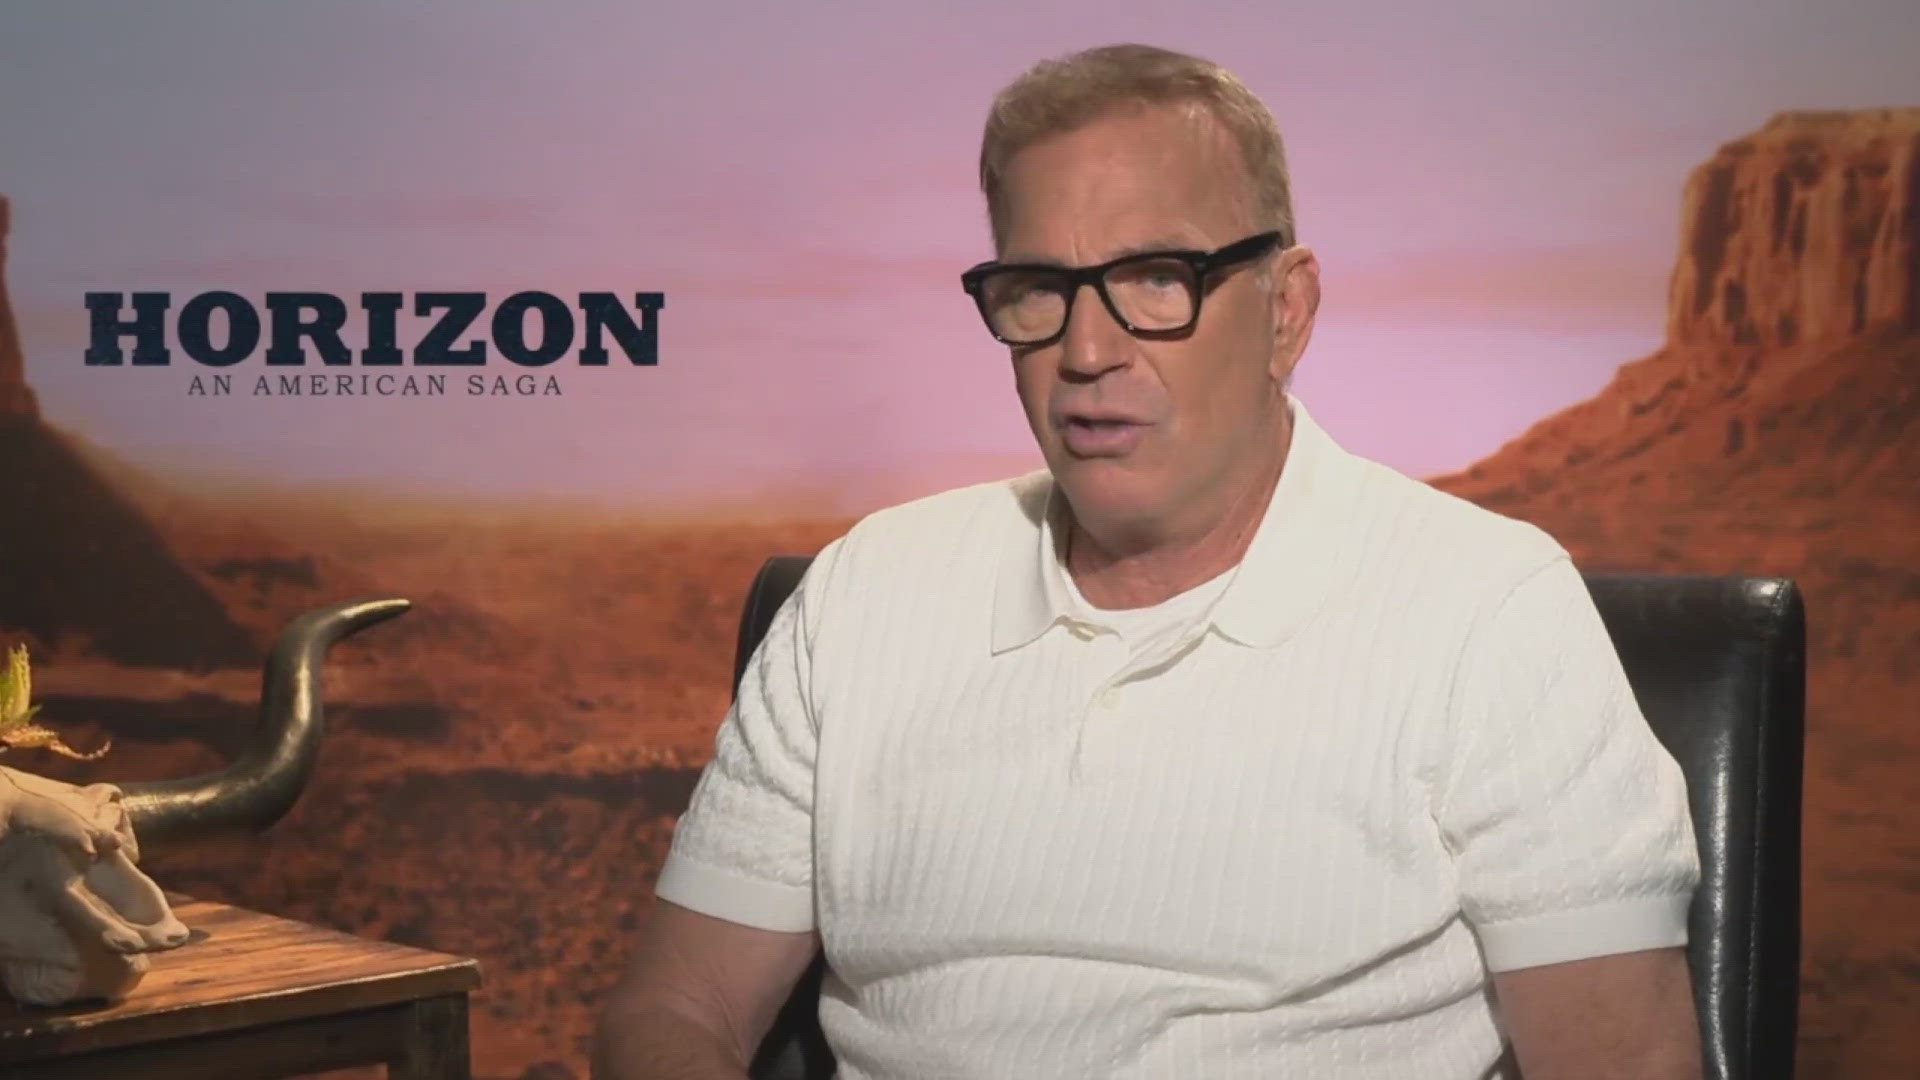 Kevin Costner, the director of new movie "Horizon: An American Saga," talks about his new film.